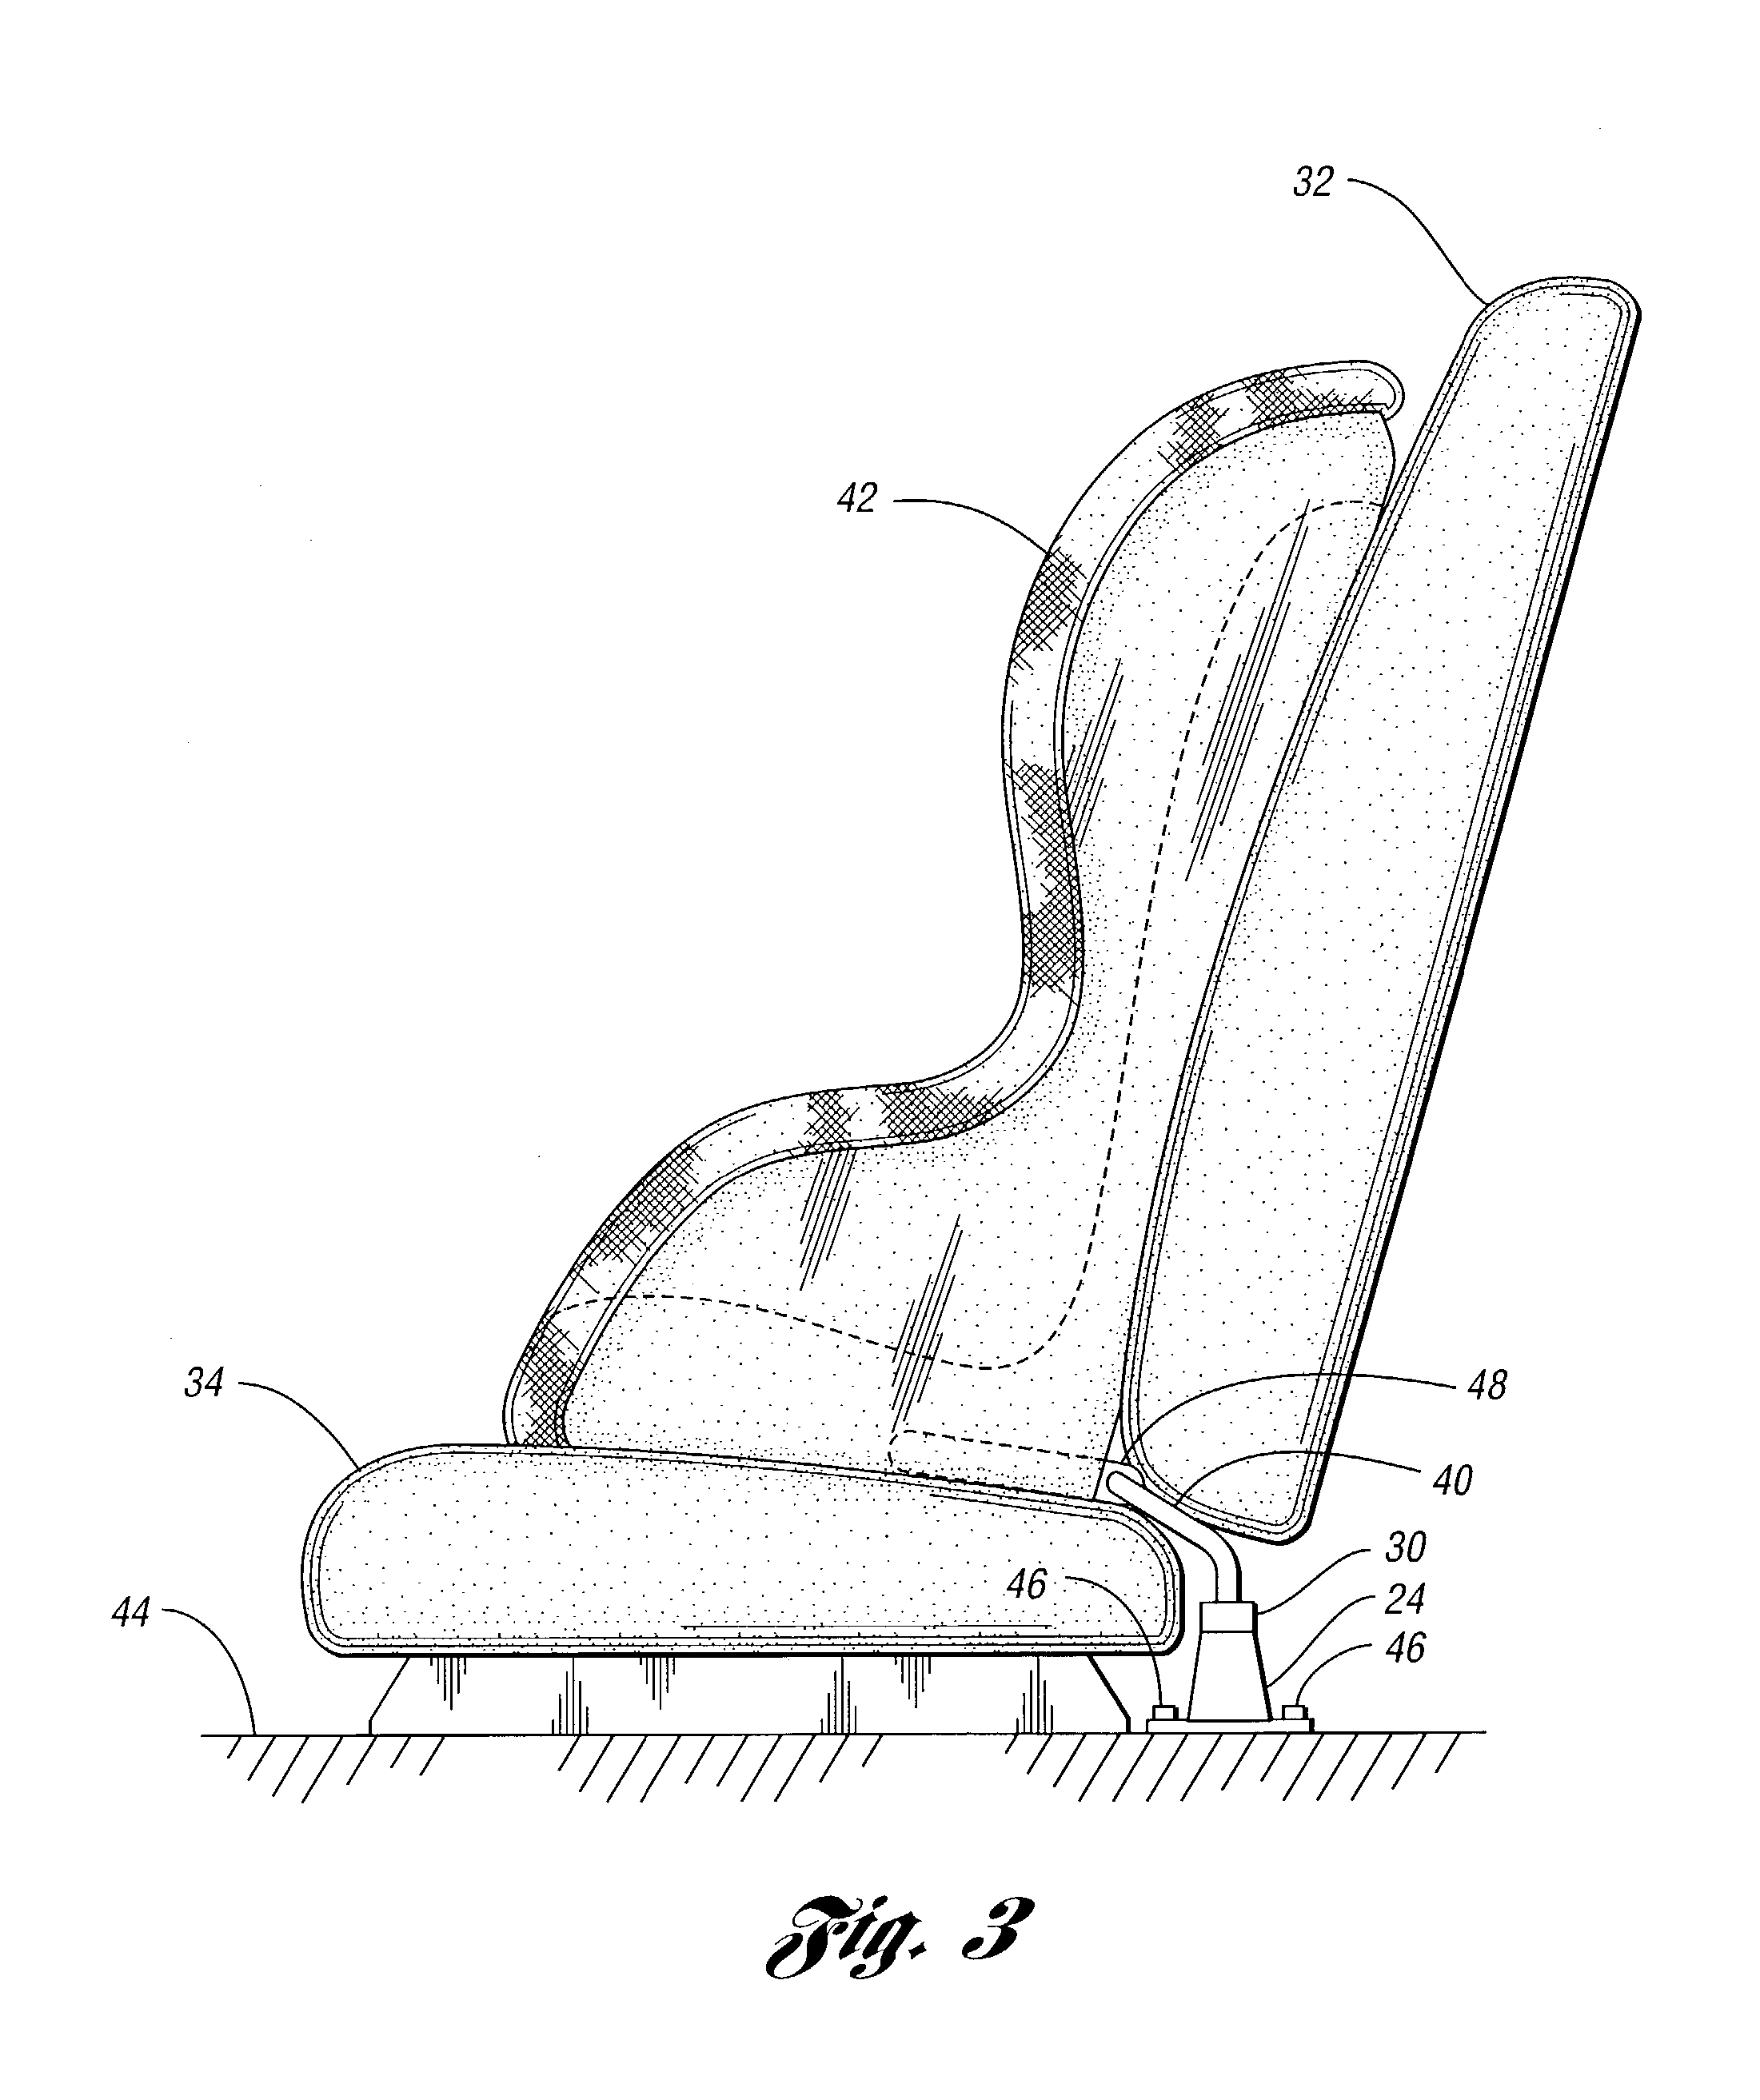 Restraint anchorage for a child restraint system